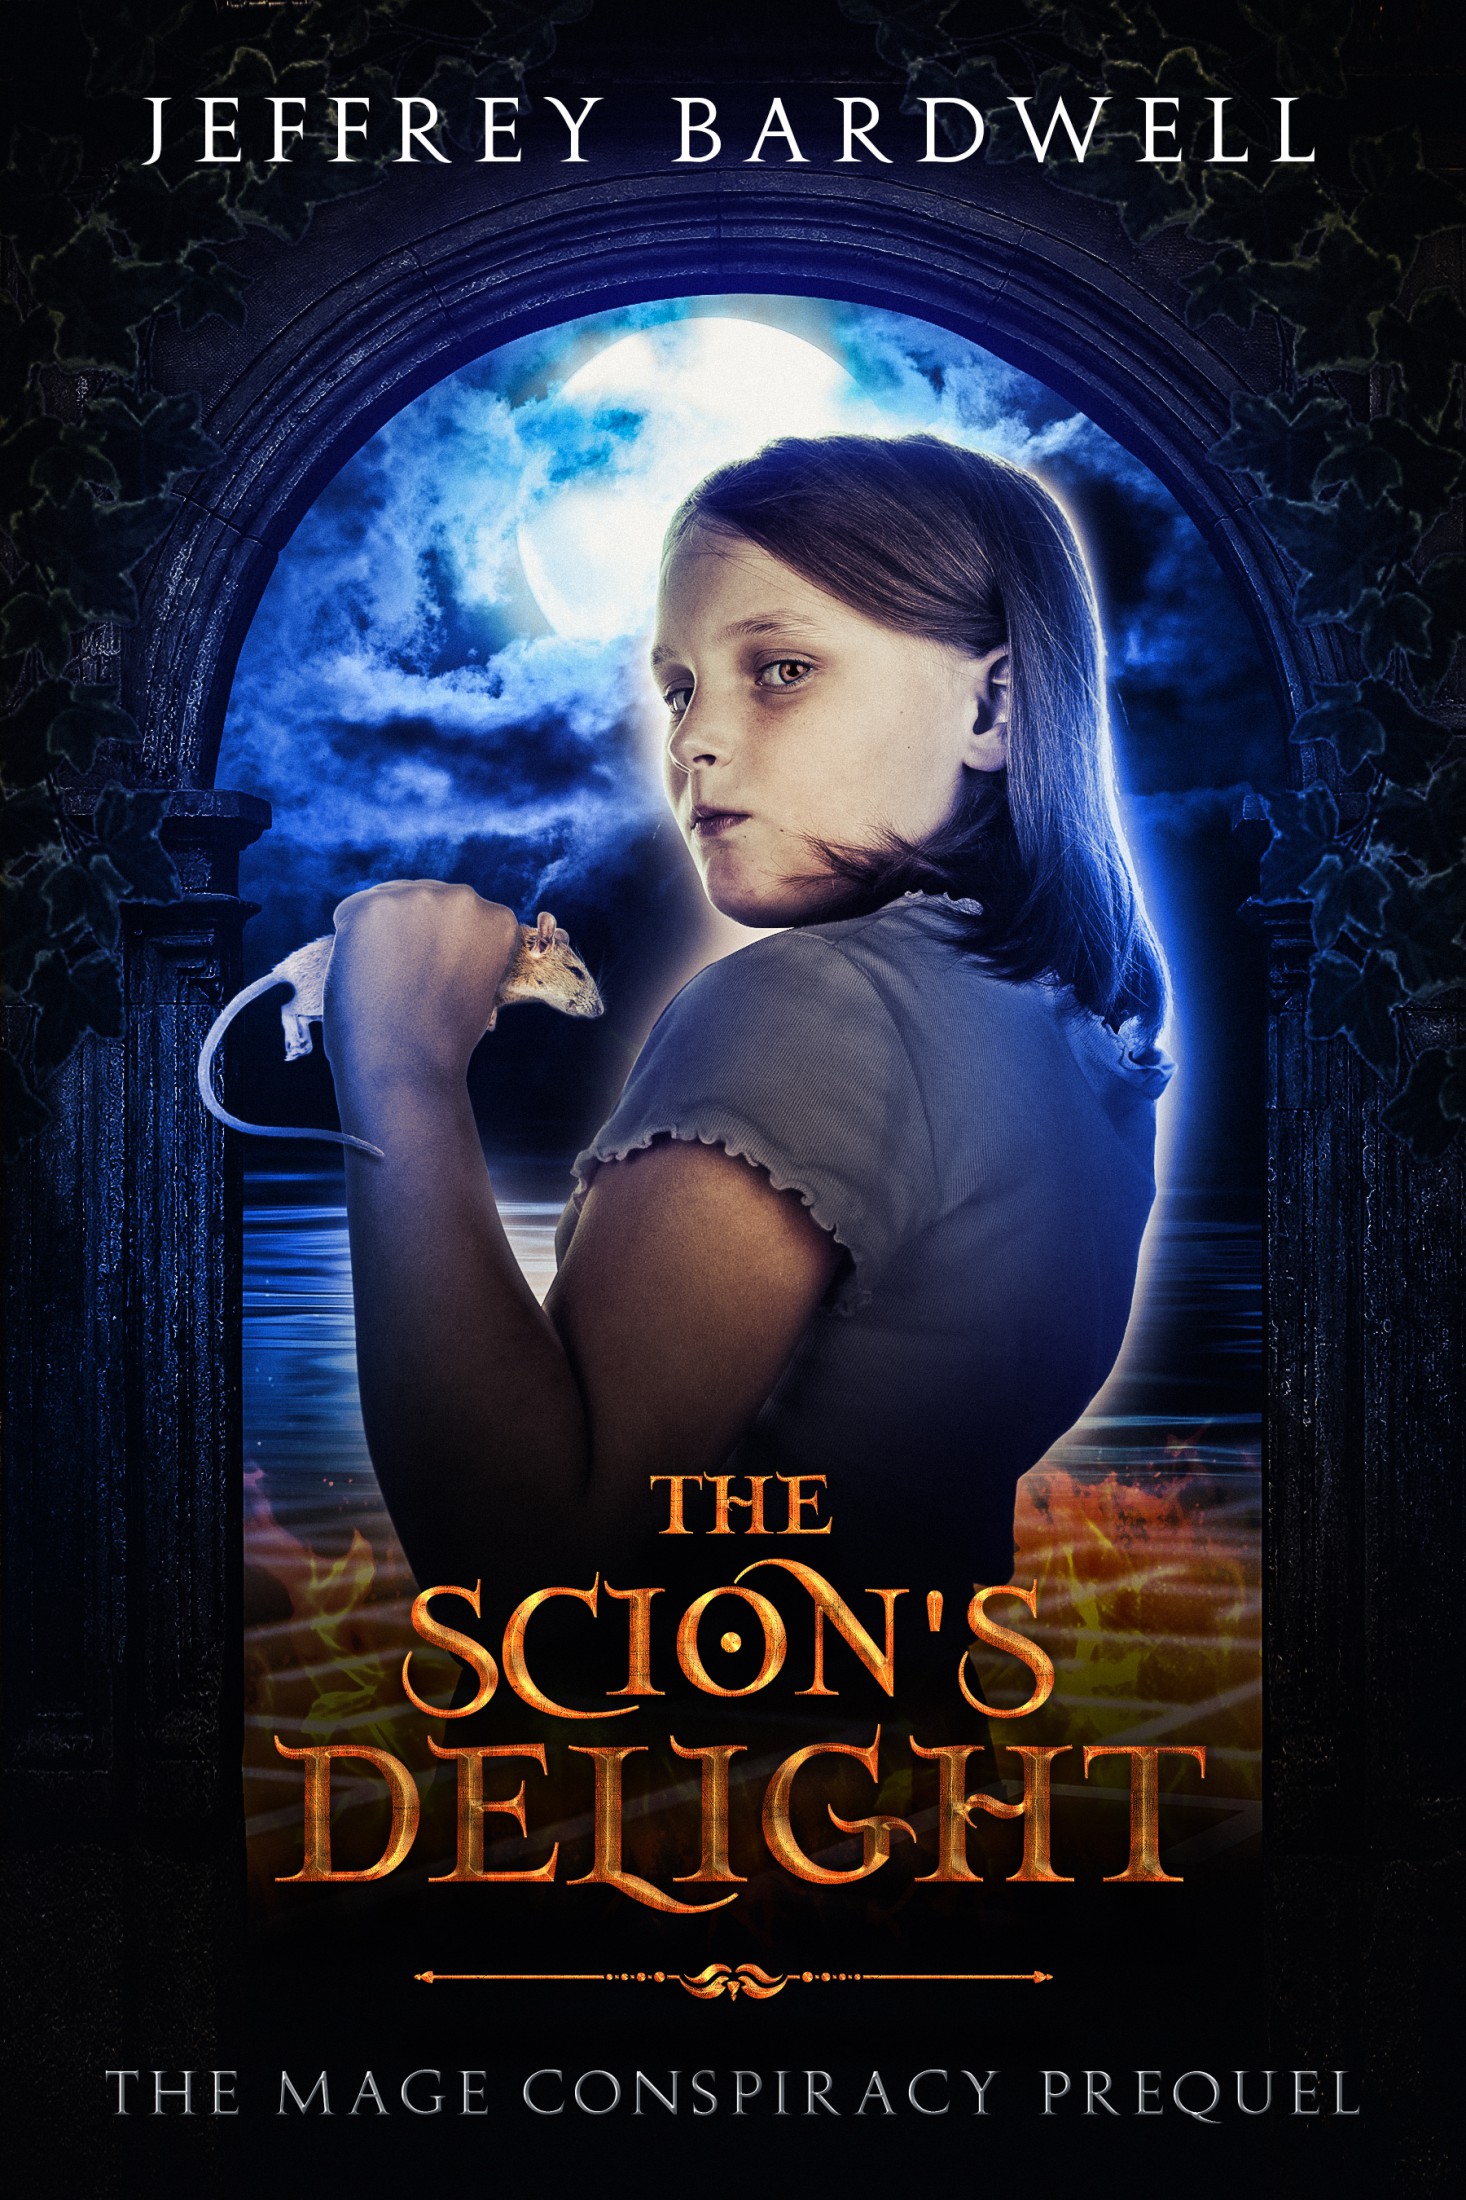 The Scion's Delight by Jeffrey Bardwell